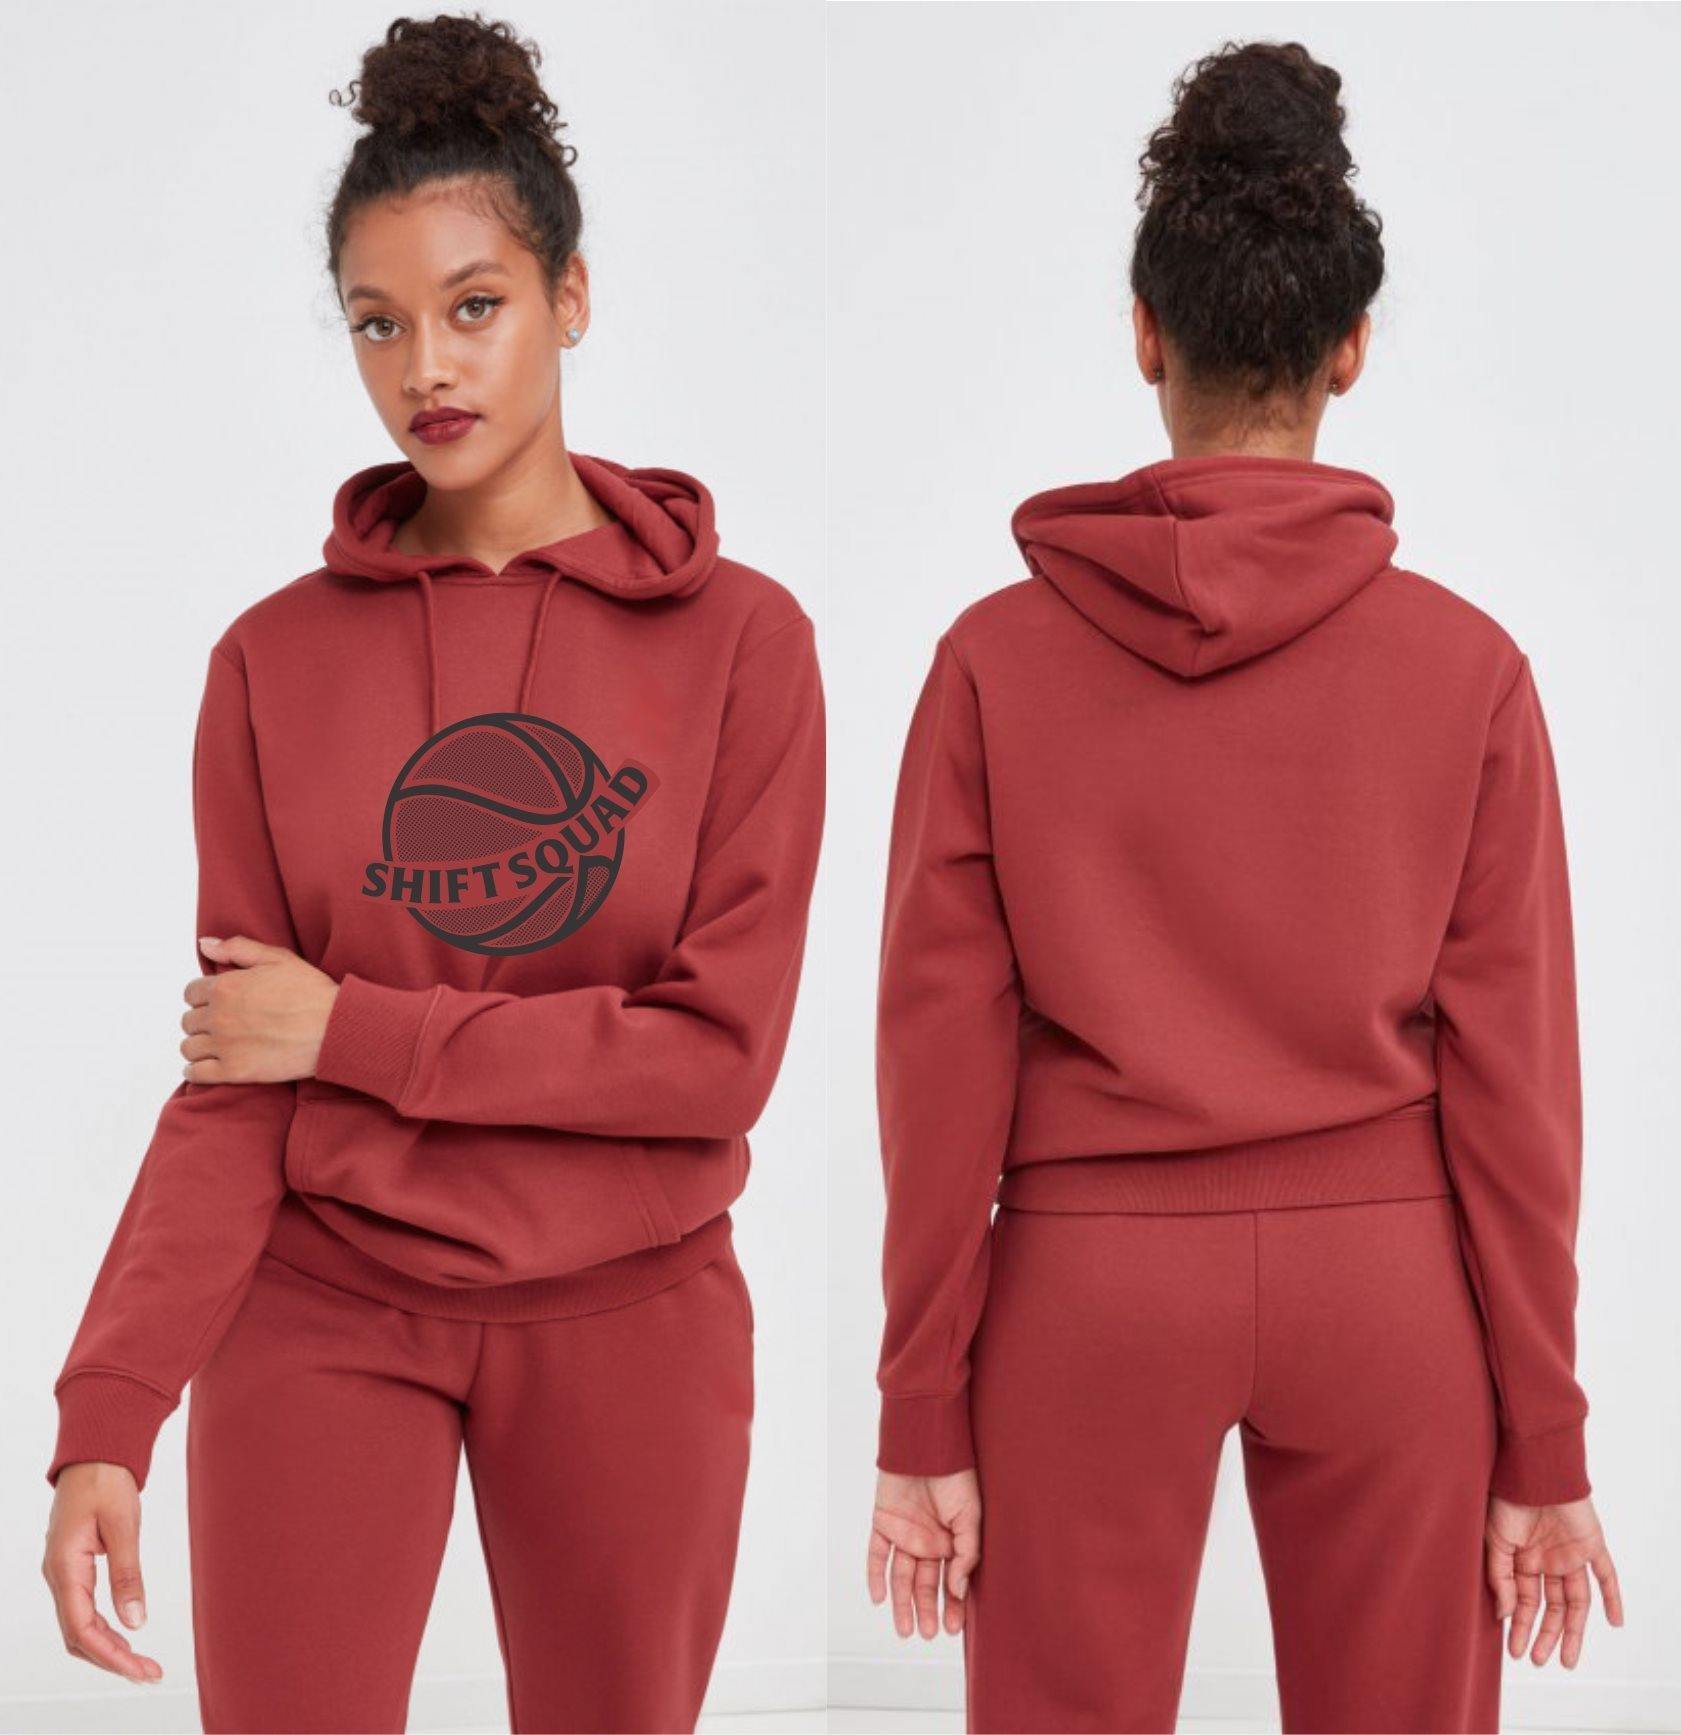 Shiftsquad Hoodies for Women Fall and Winter line | ShiftSquad